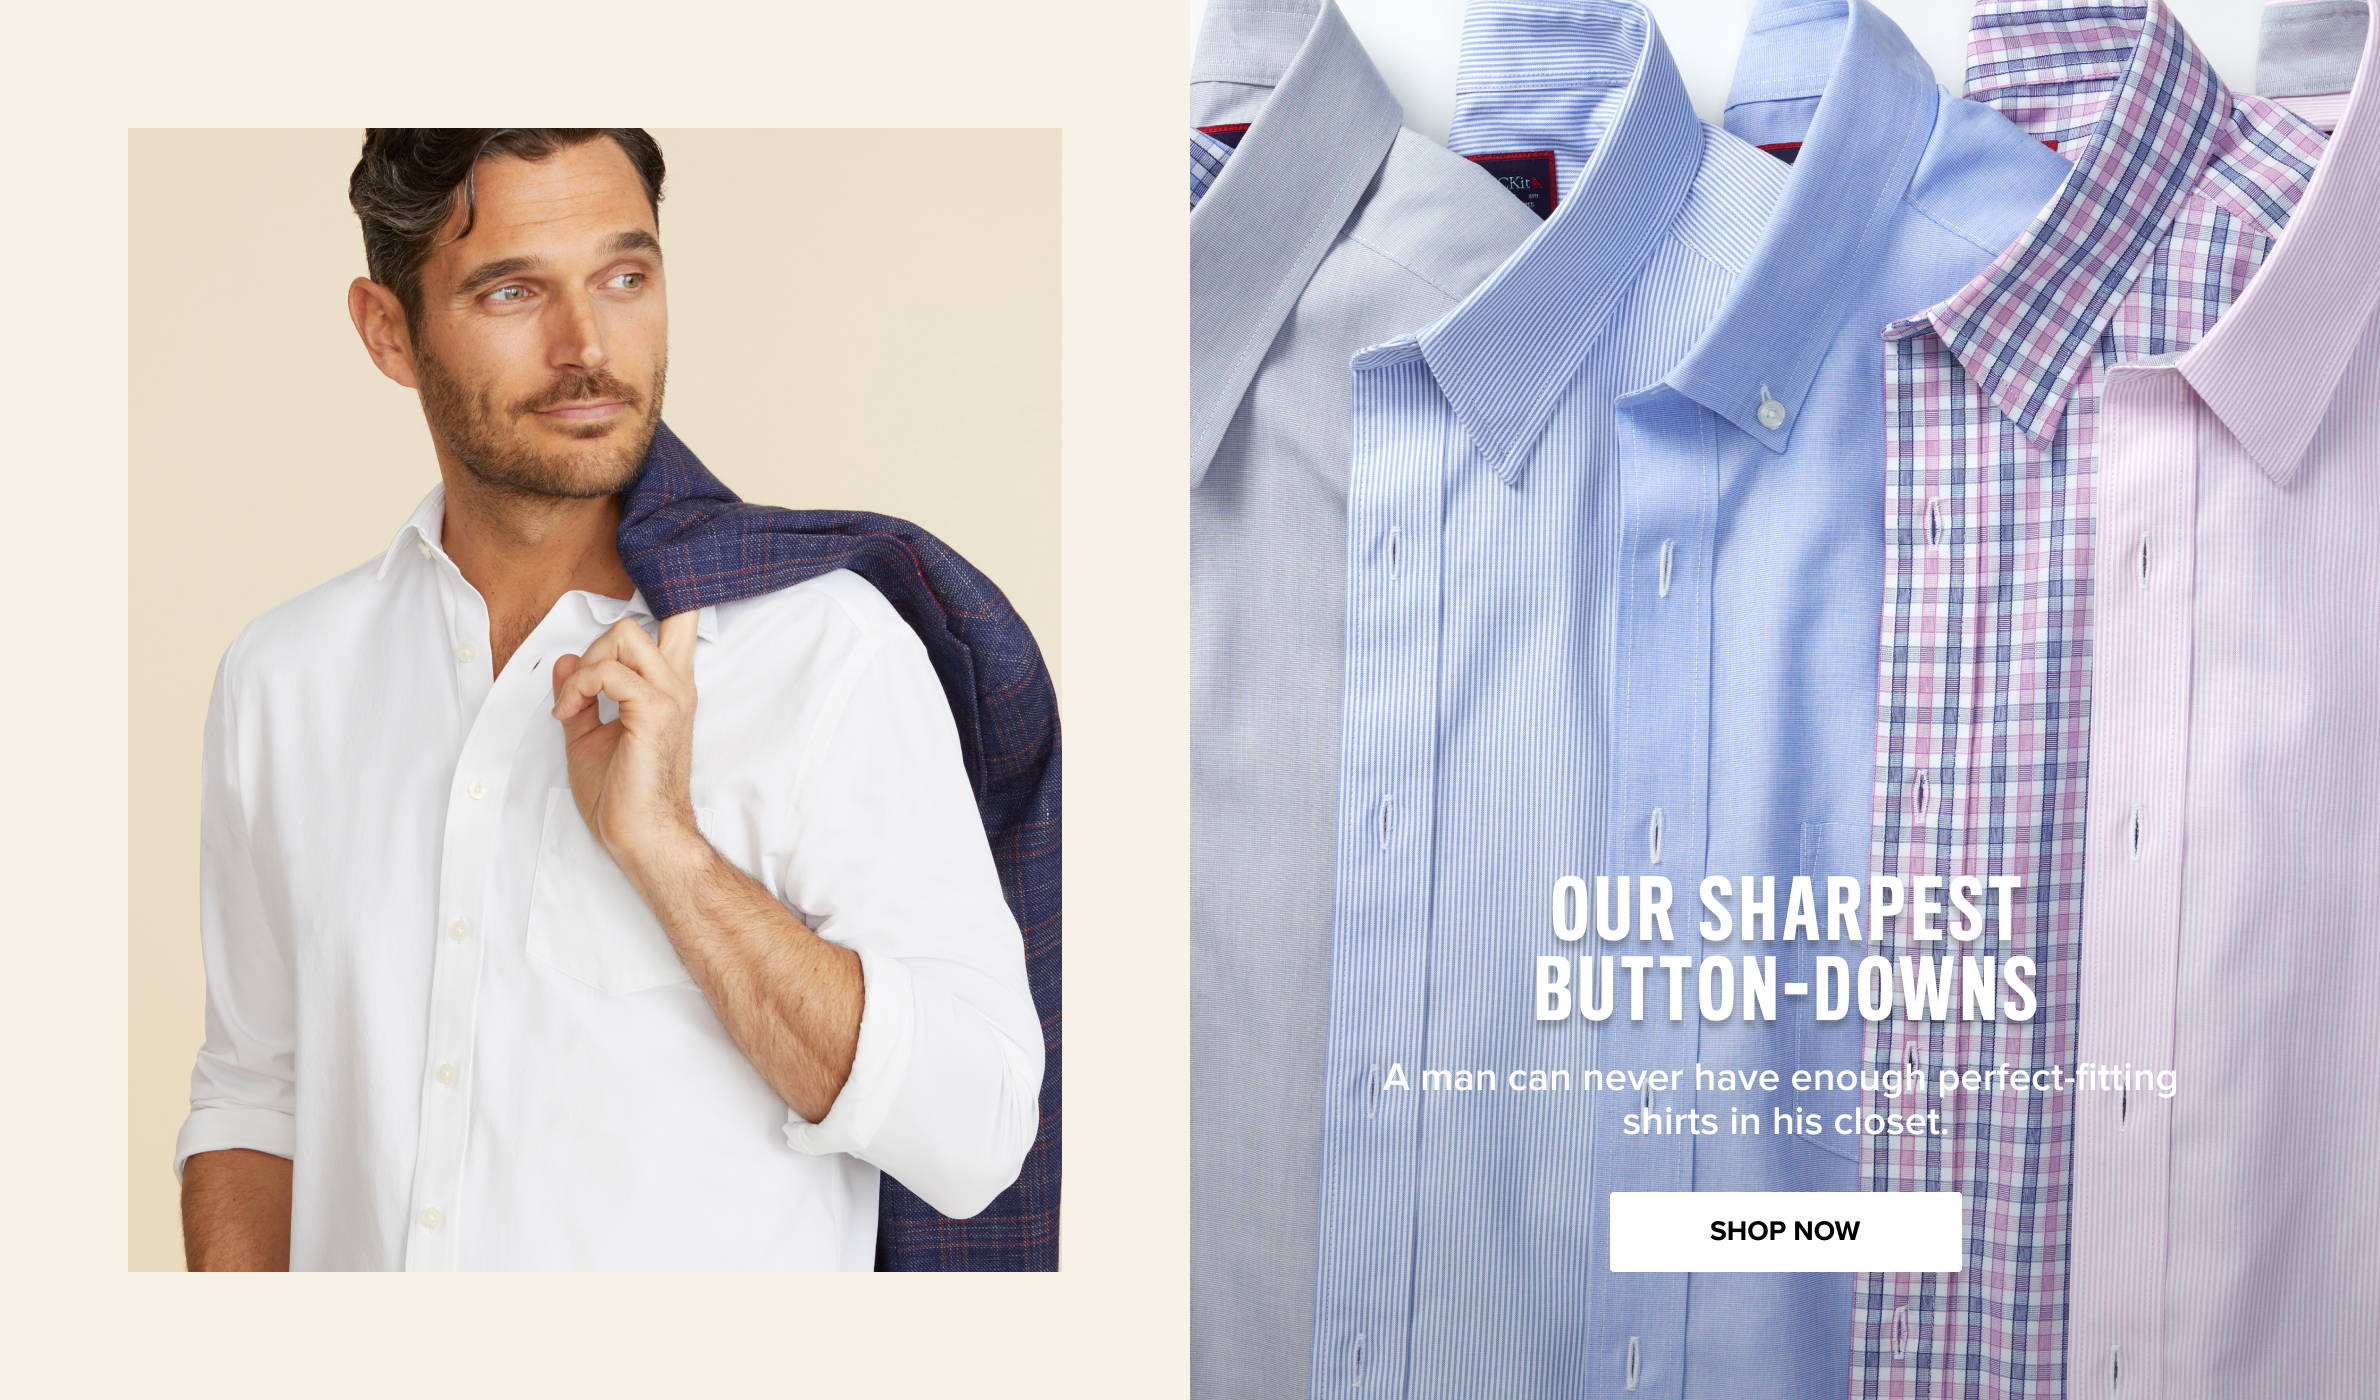 Our Sharpest Button-Downs—A man can never have enough perfect-fitting shirts in his closet.